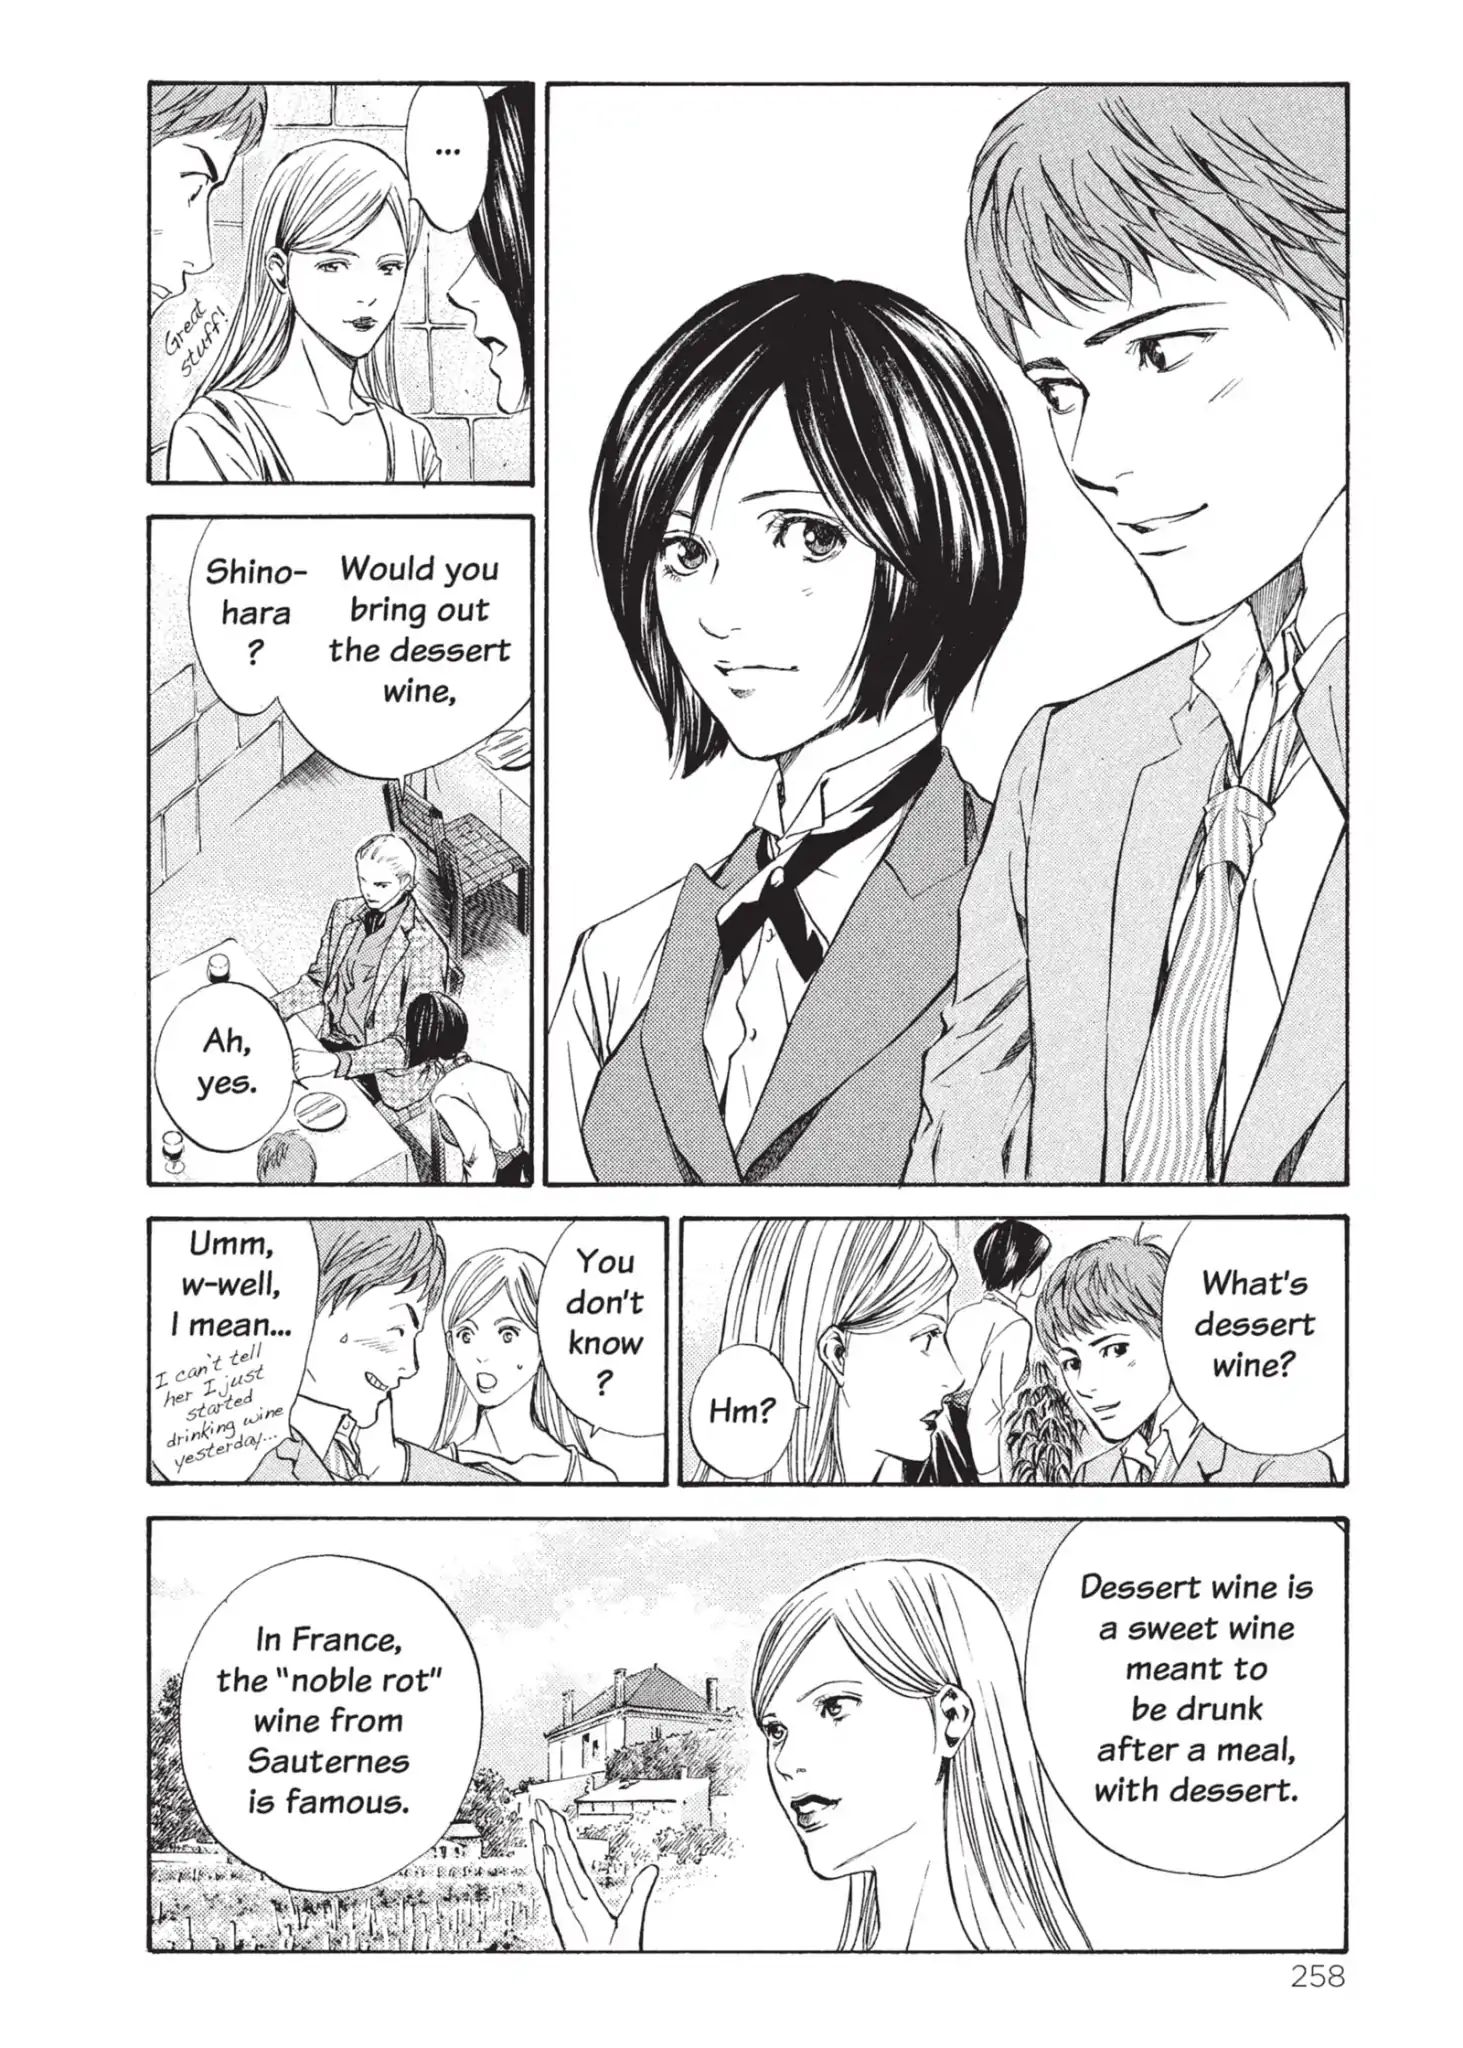 Kami No Shizuku Vol.1 Chapter 11: The Sweet Dessert Of Parting - Picture 2